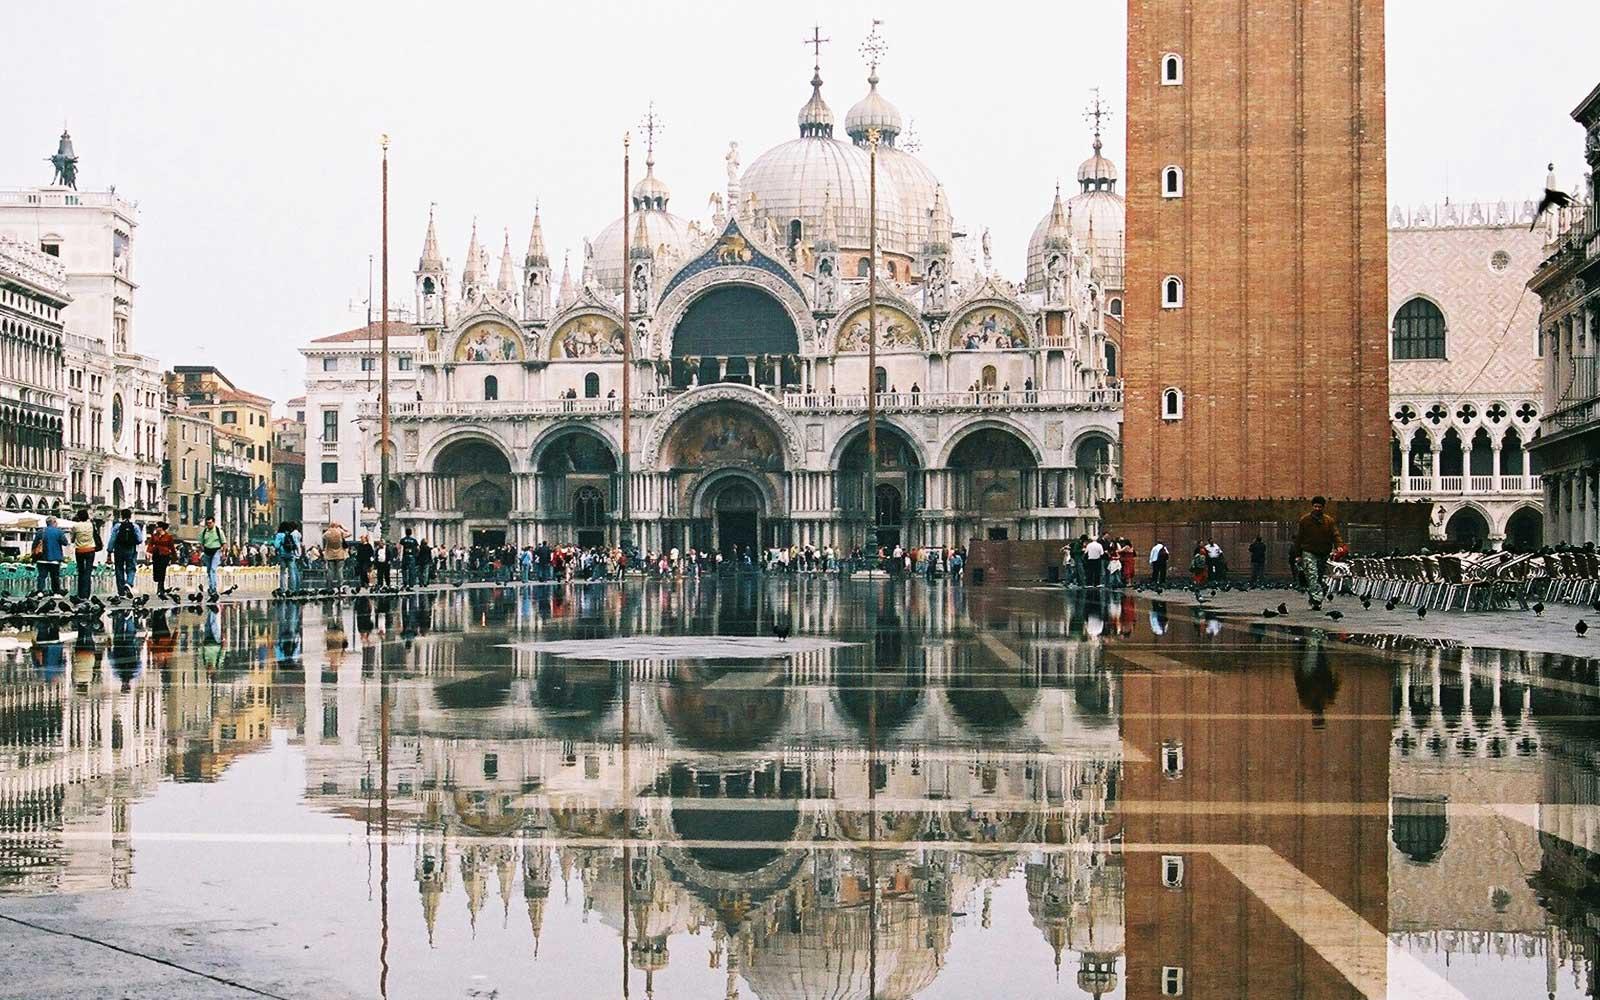 Flooding of the Basilica San Marco in Venice, Italy. 